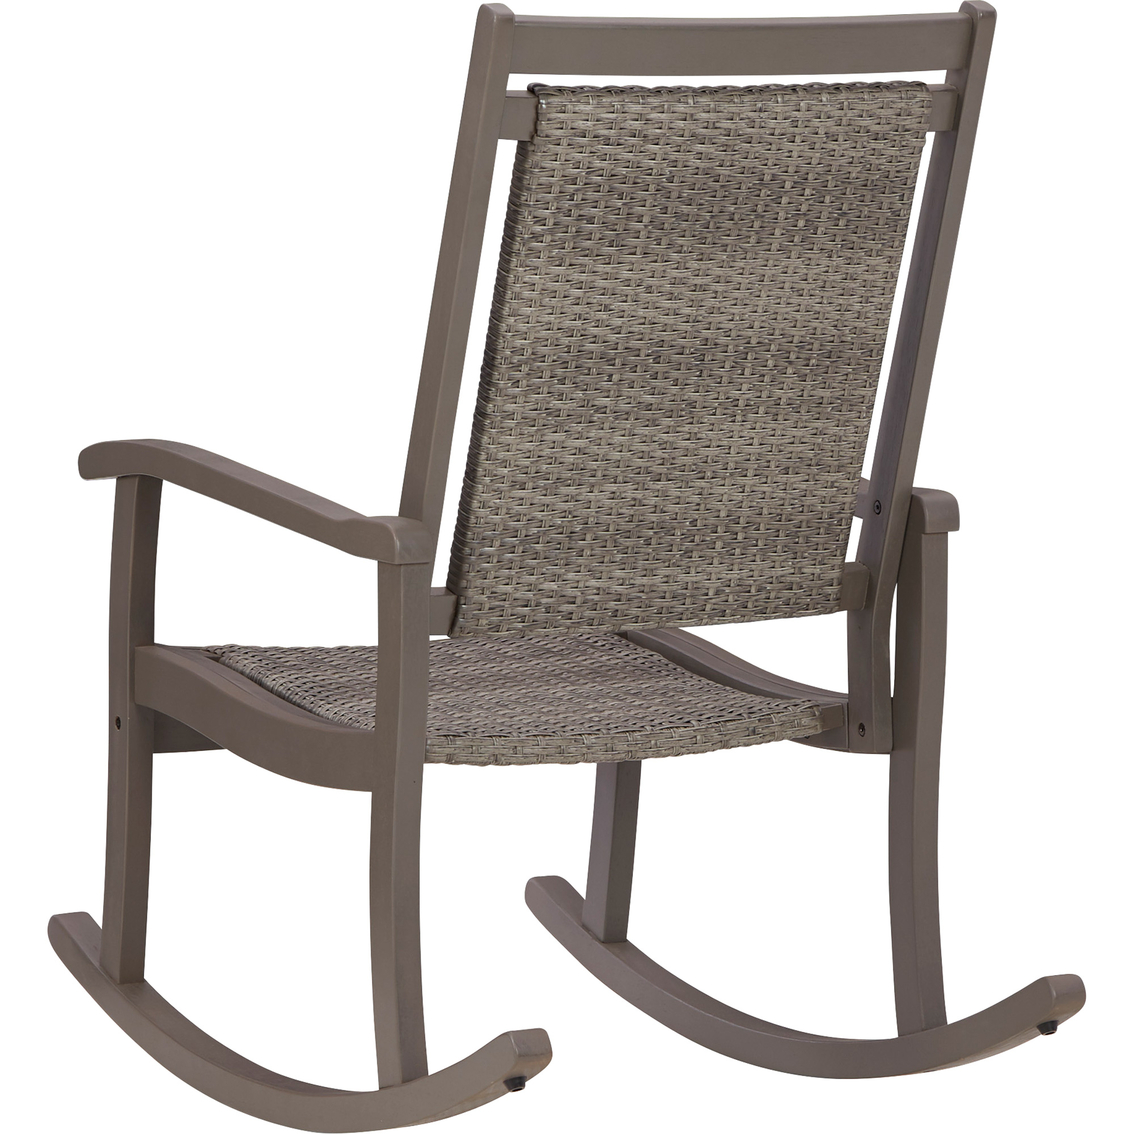 Signature Design by Ashley Emani Rocking Chair - Image 4 of 8